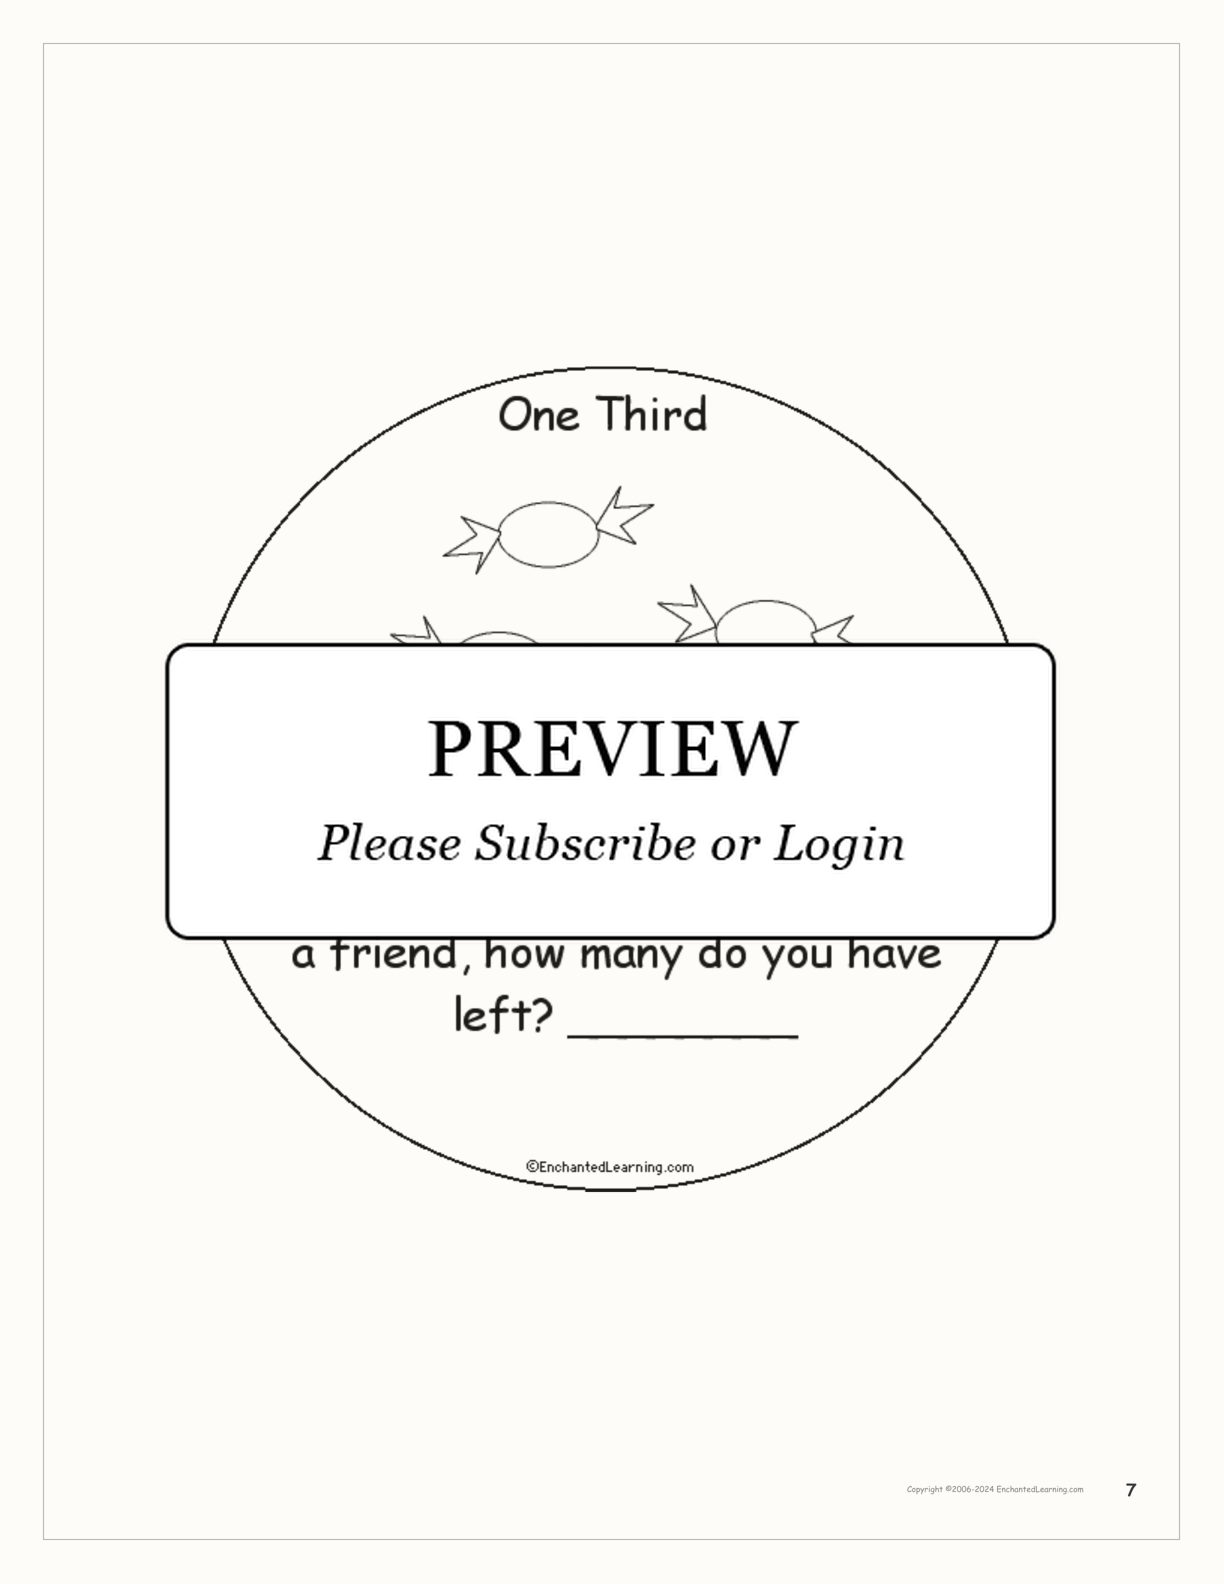 One Third: A Book on Fractions interactive printout page 7